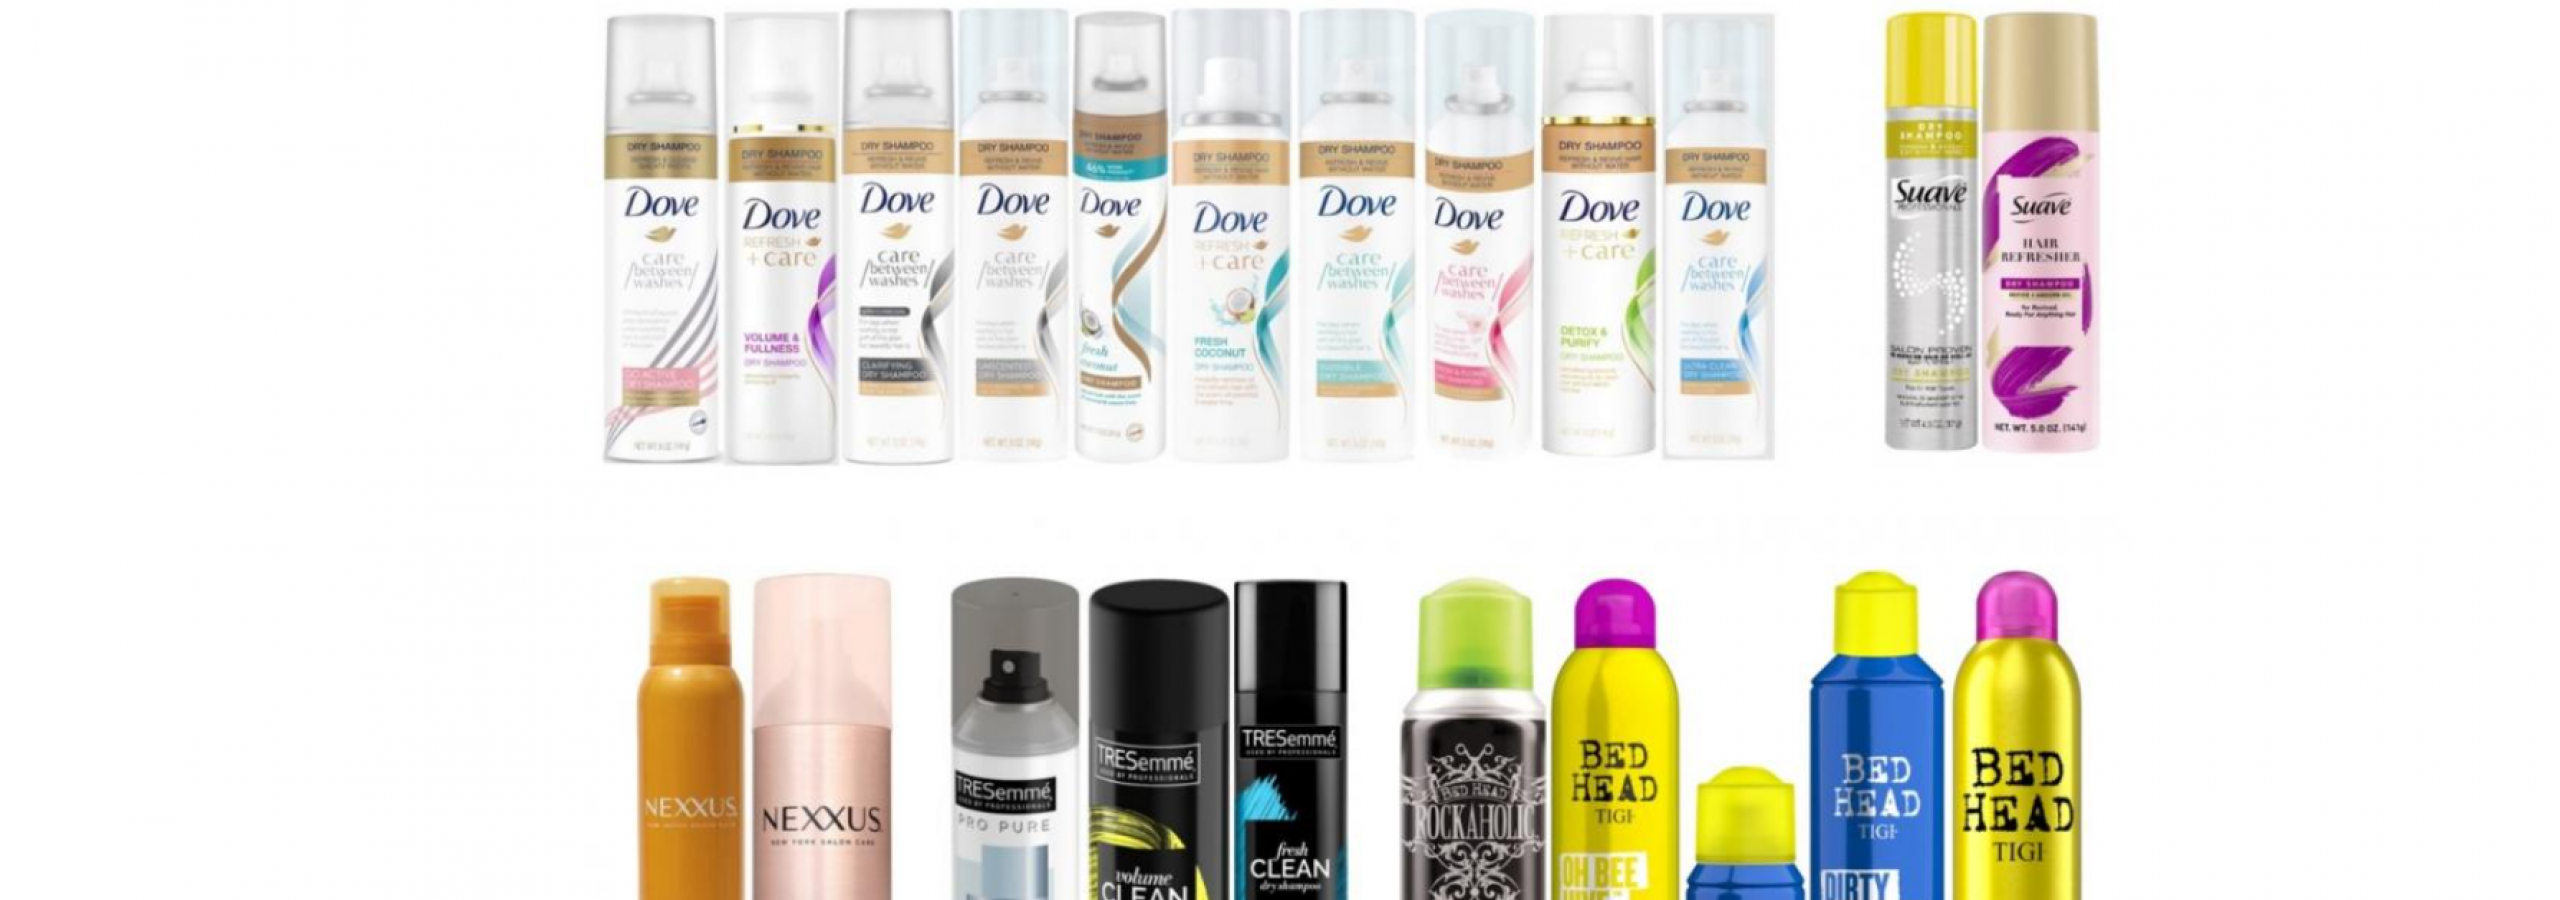 photo of recalled dry shampoo products